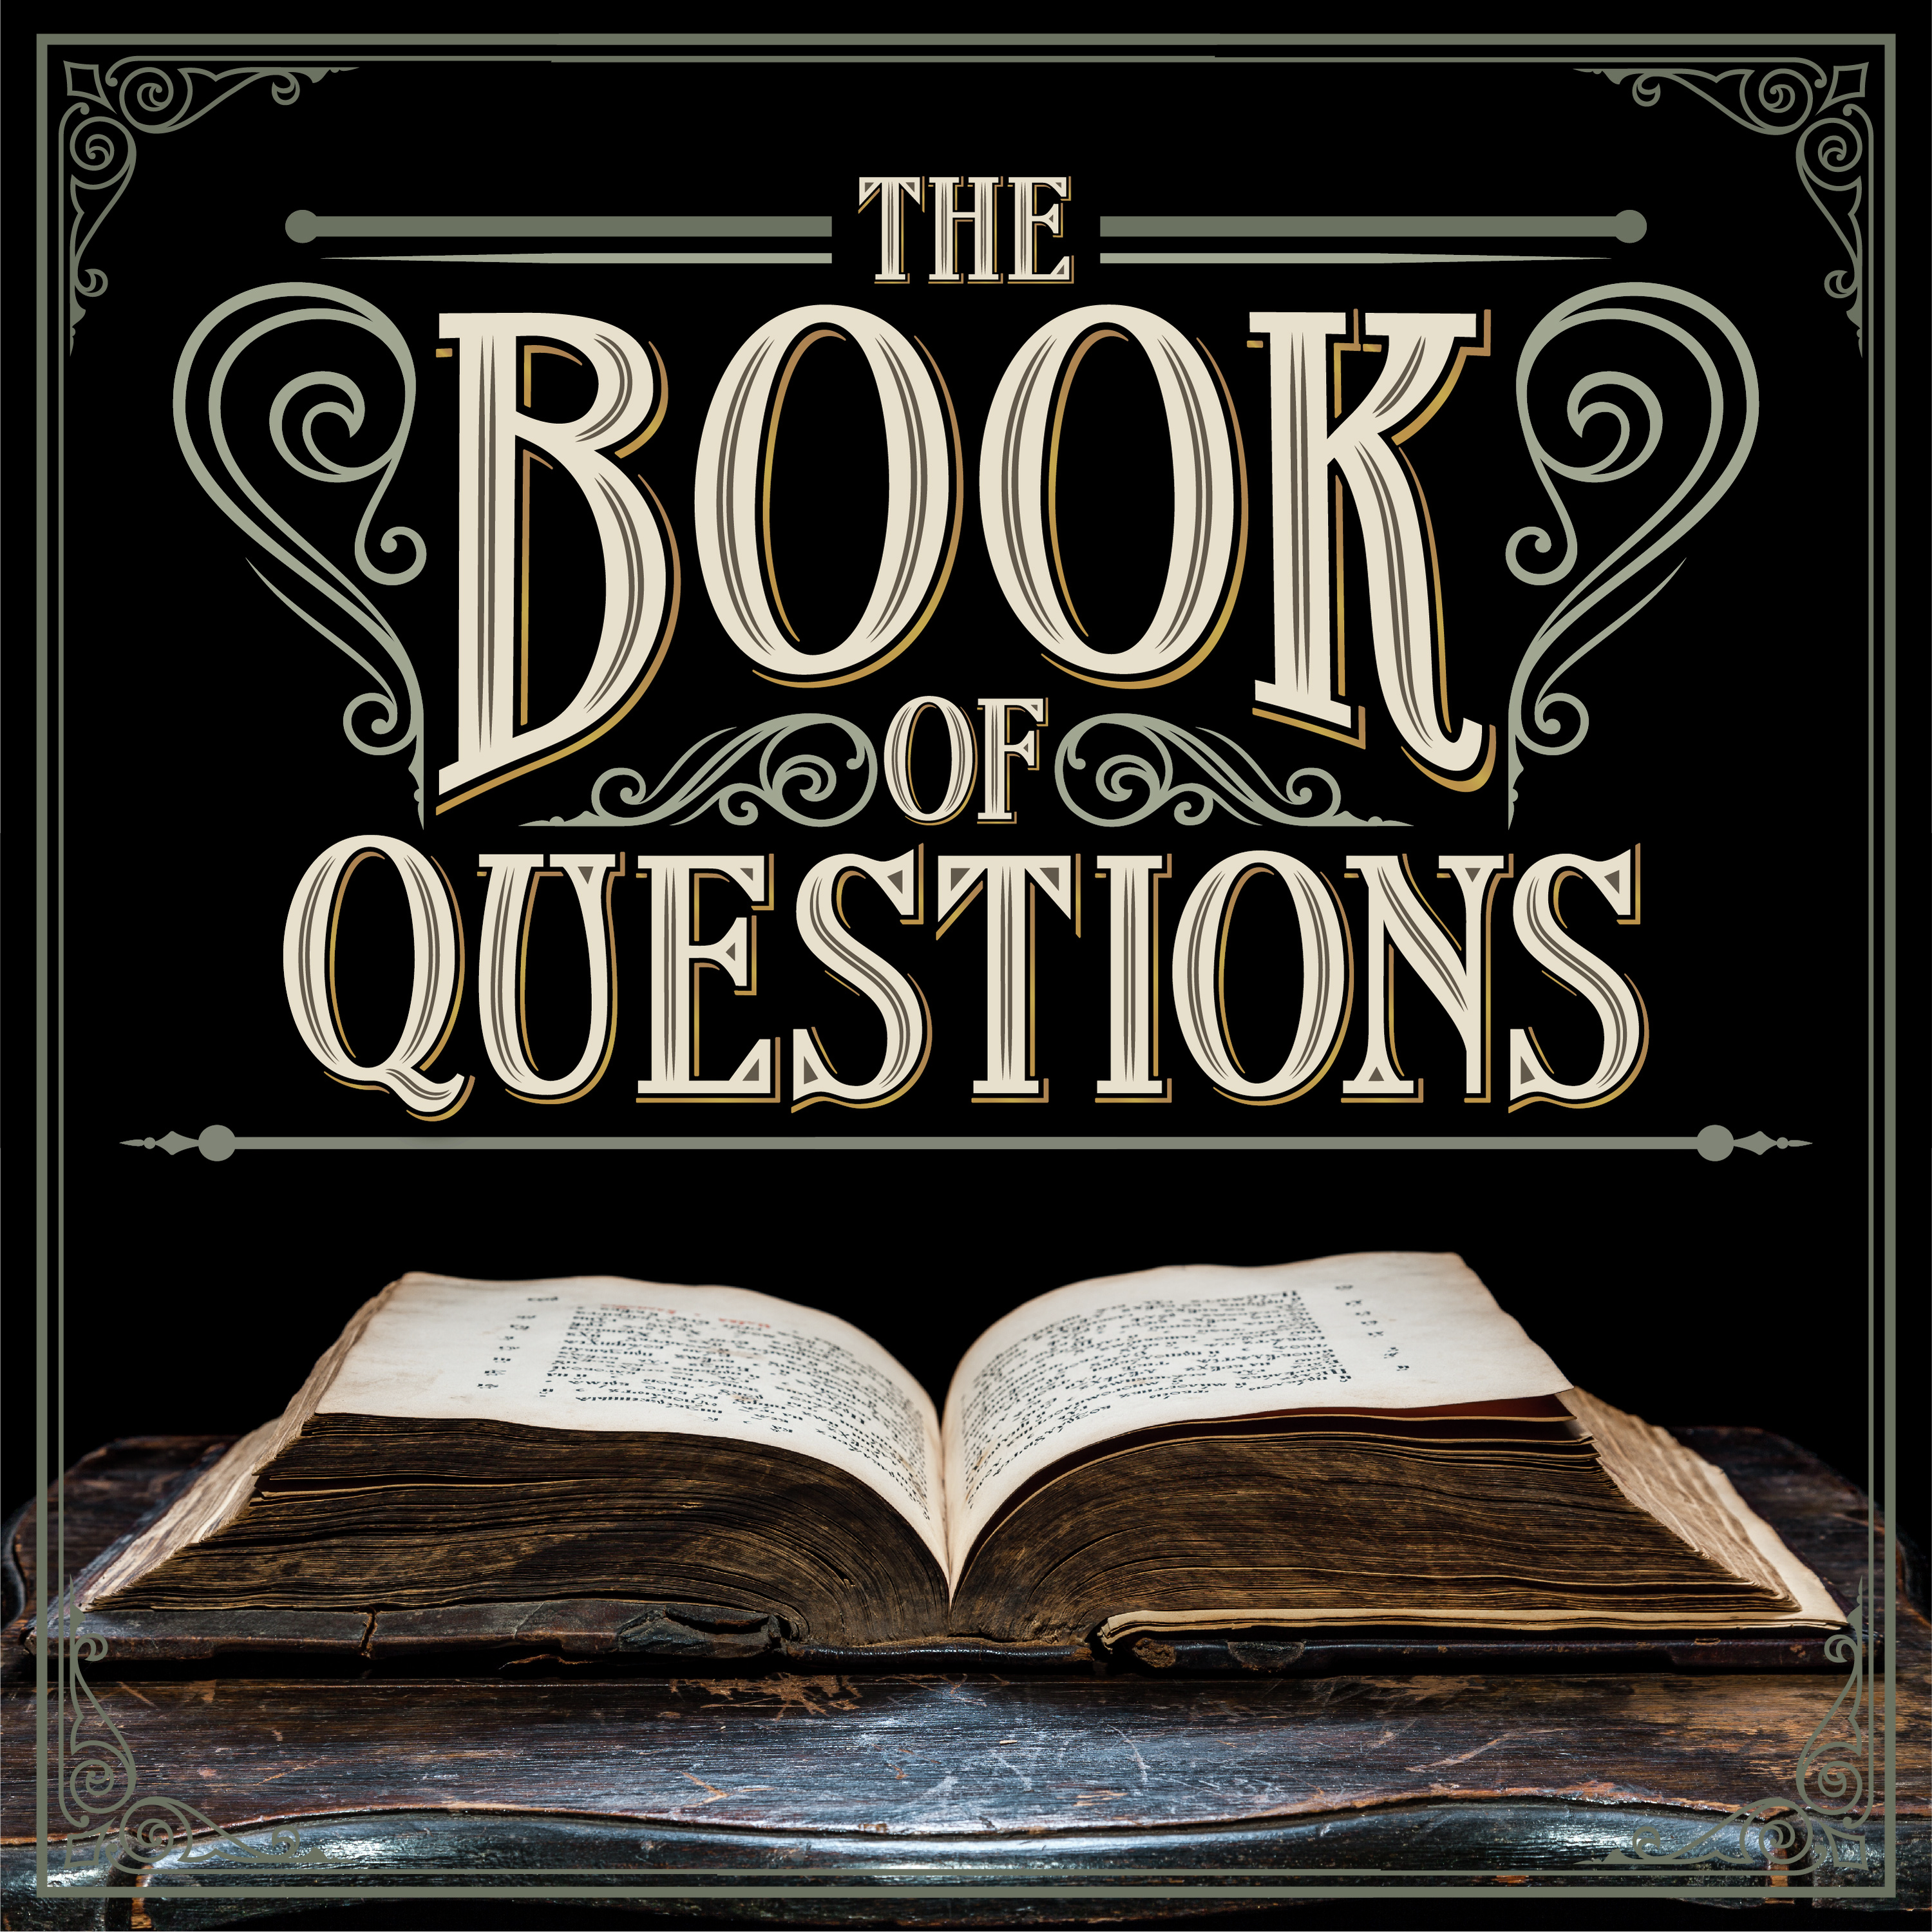 The Book of Questions: What would be your first question after waking up from being a cryogenically frozen for a hundred years?